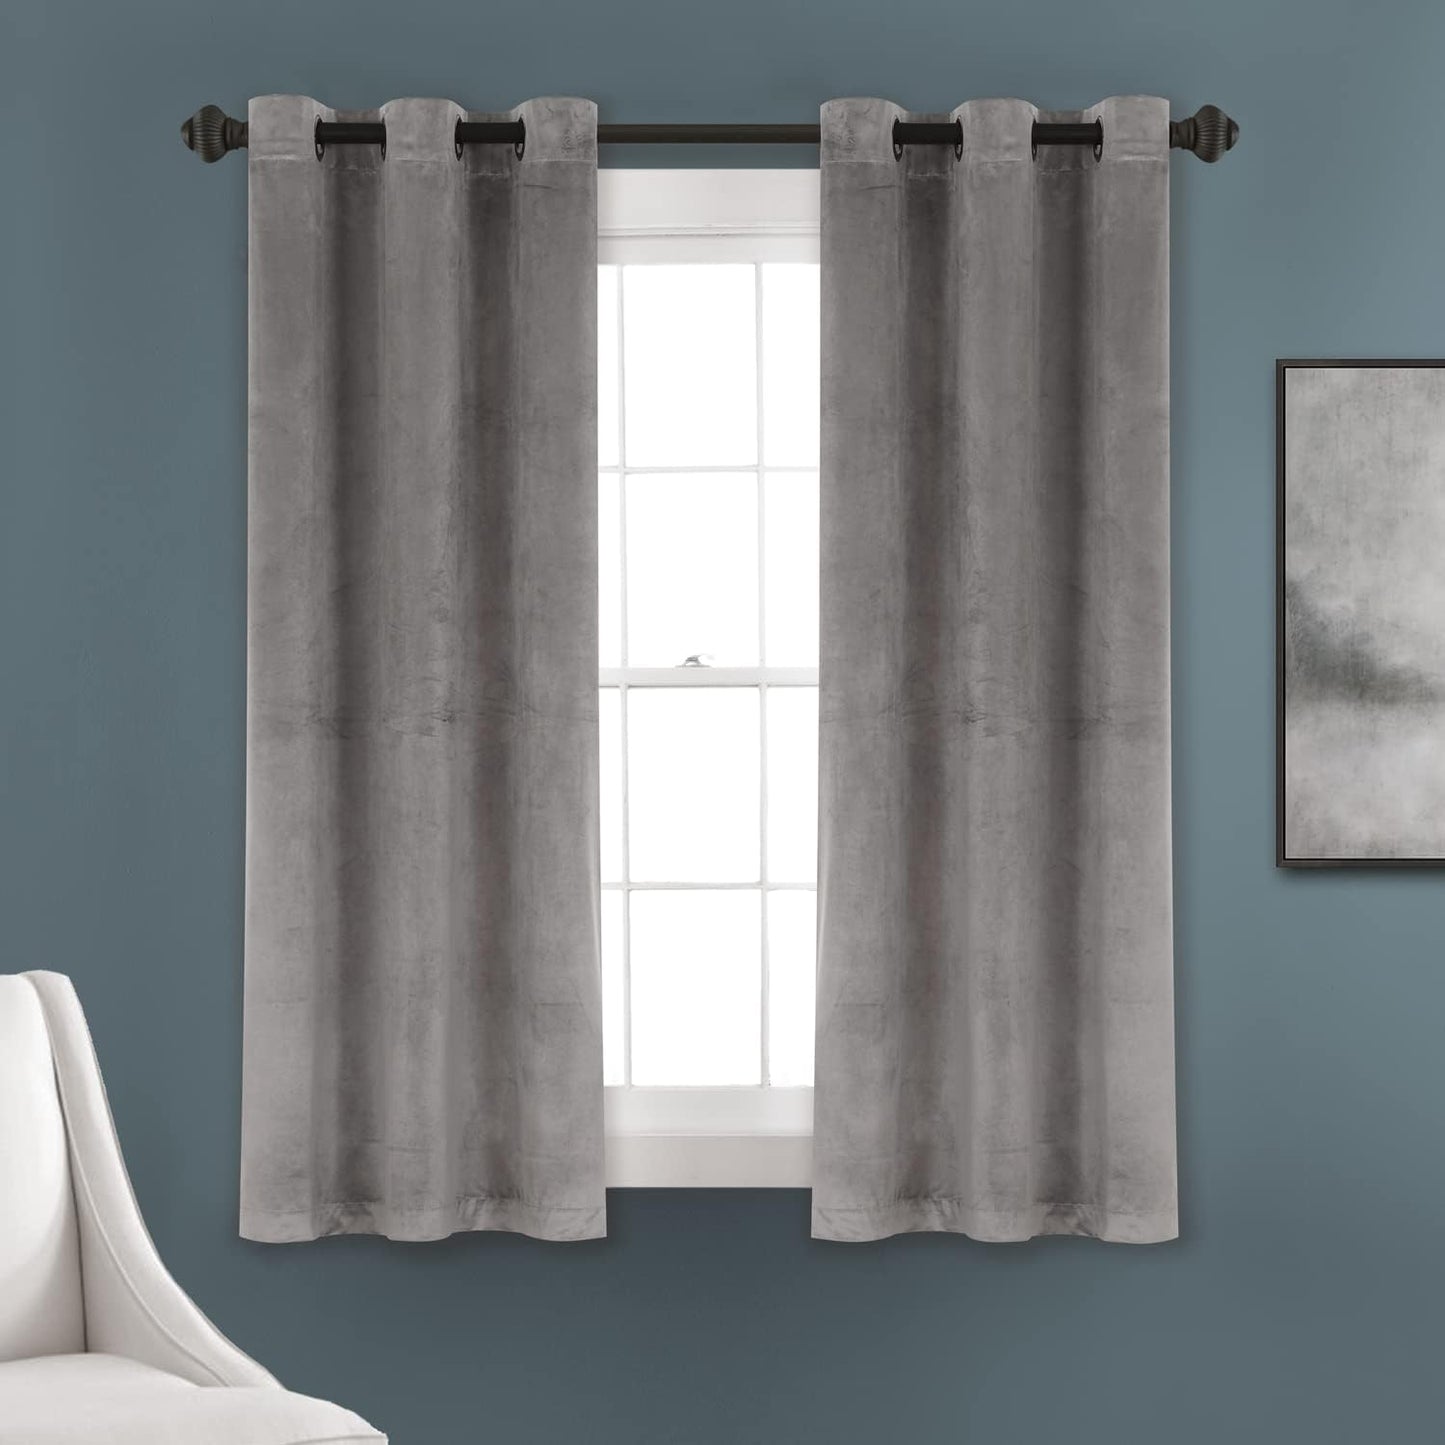 Lush Decor Prima Velvet Curtains Color Block Light Filtering Window Panel Set for Living, Dining, Bedroom (Pair), 38" W X 84" L, Navy  Triangle Home Fashions Grey Room Darkening 38"W X 63"L